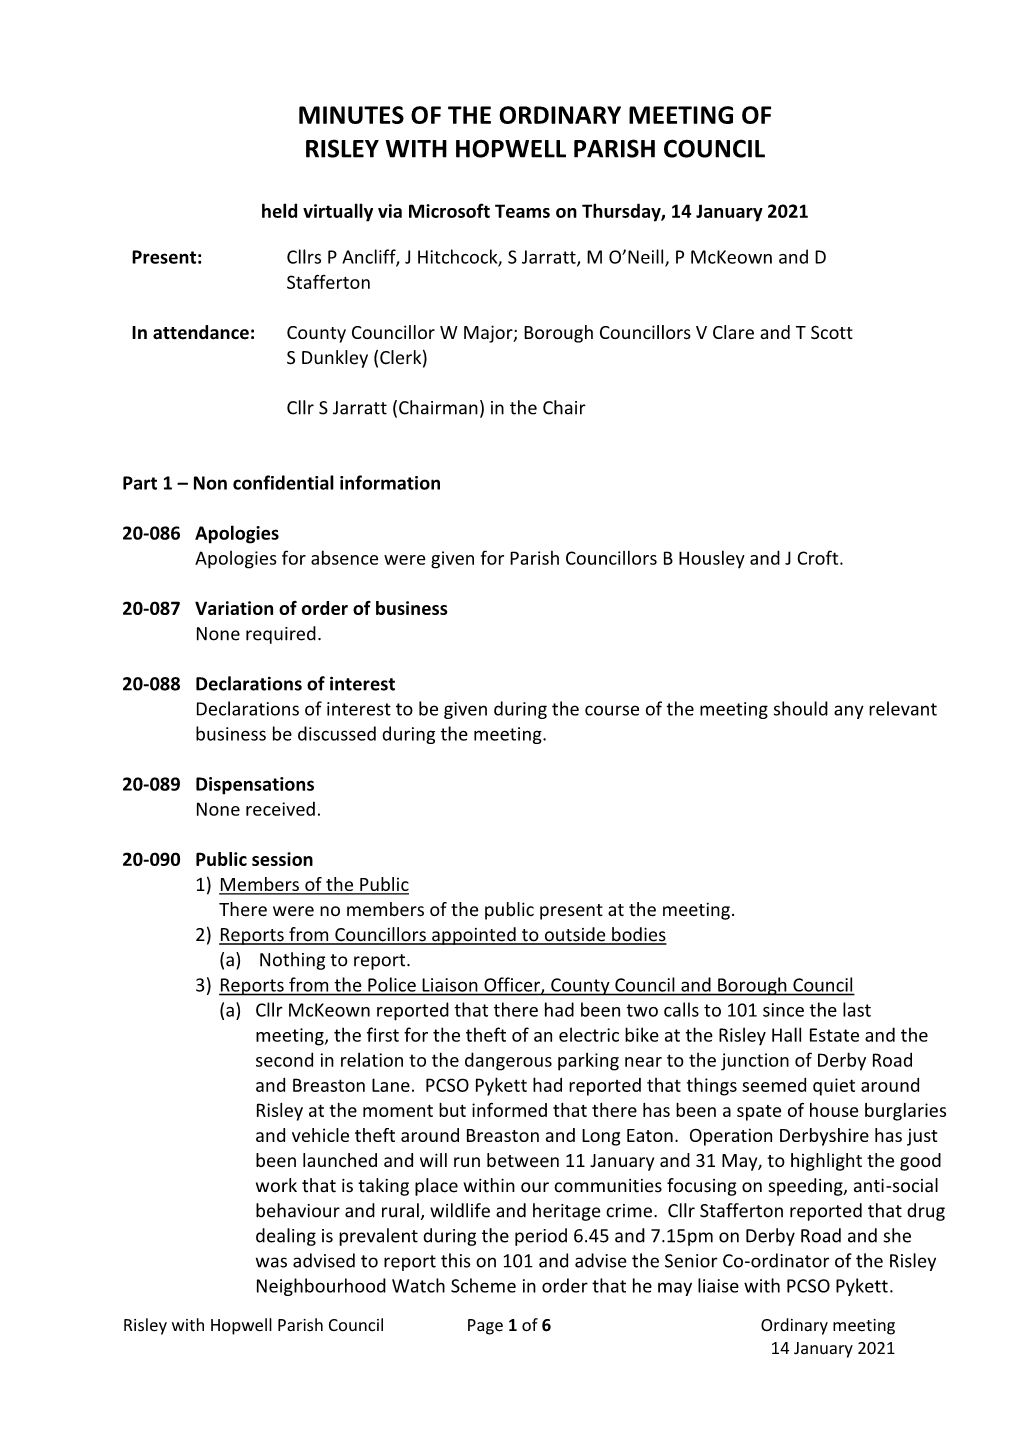 Minutes of the Ordinary Meeting of Risley with Hopwell Parish Council